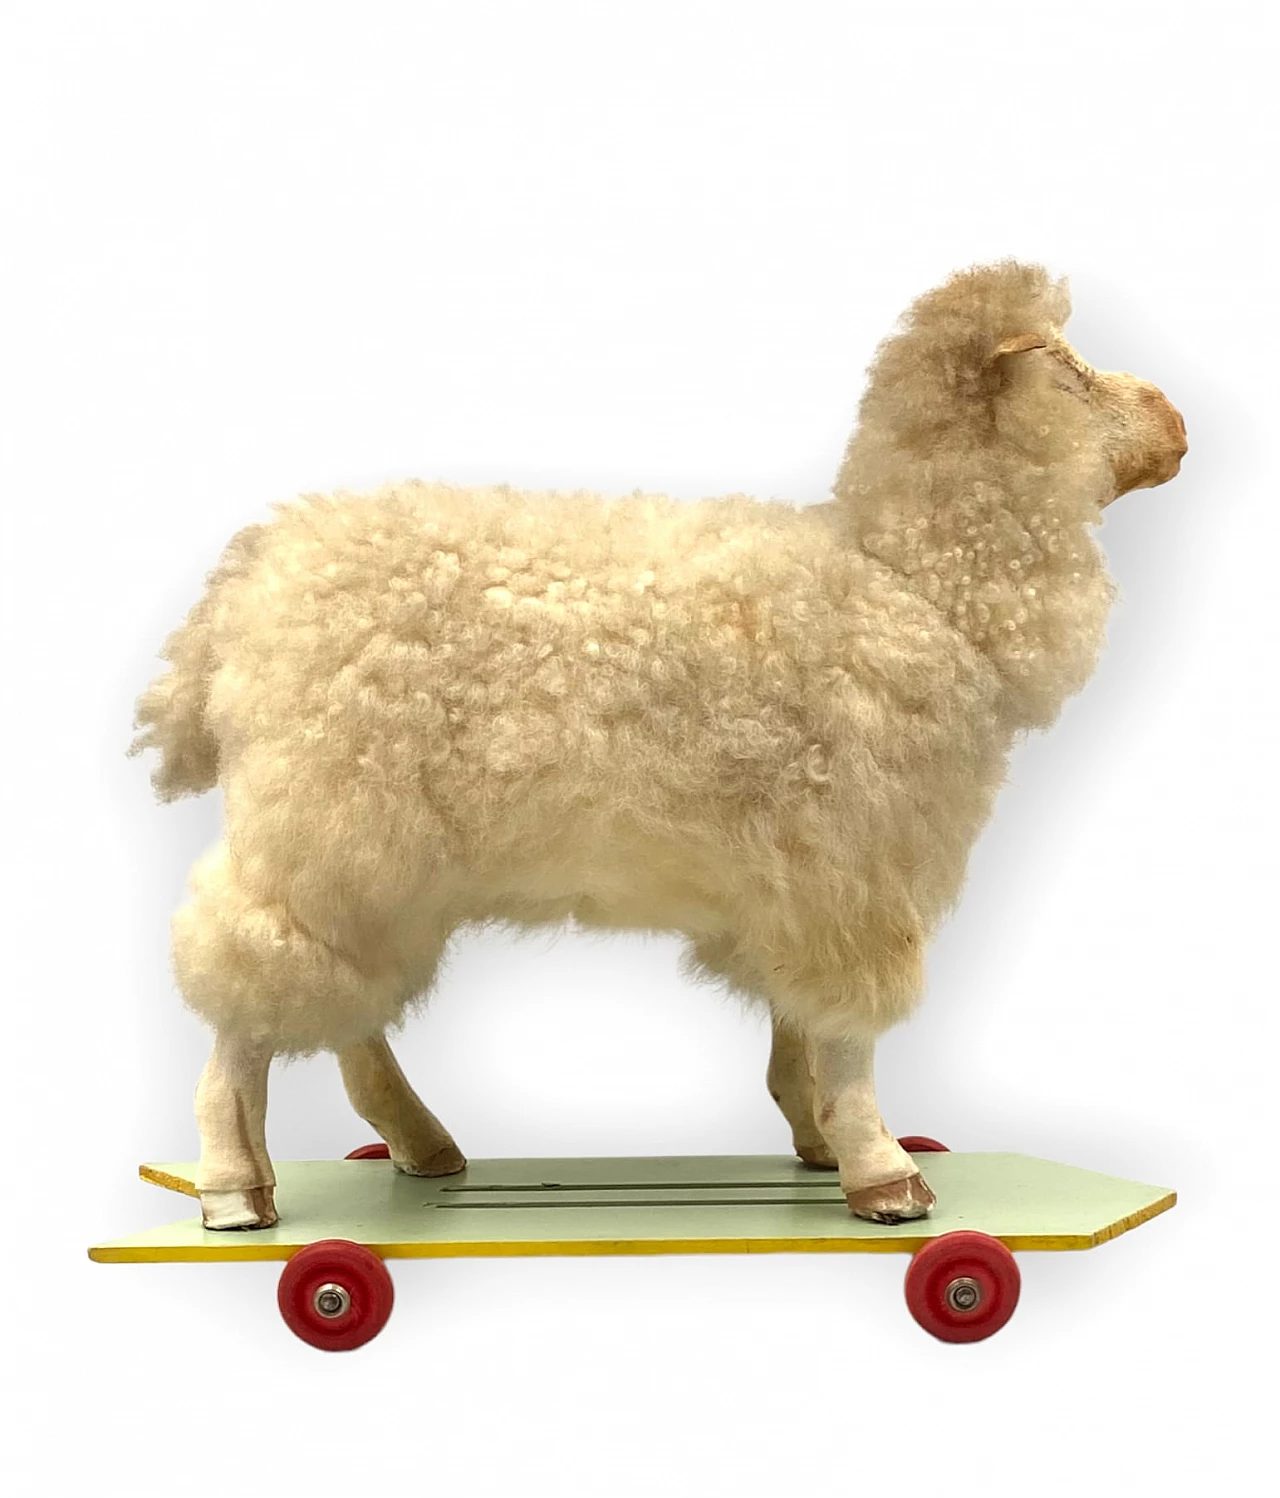 Wool and wood toy sheep with wheels 12